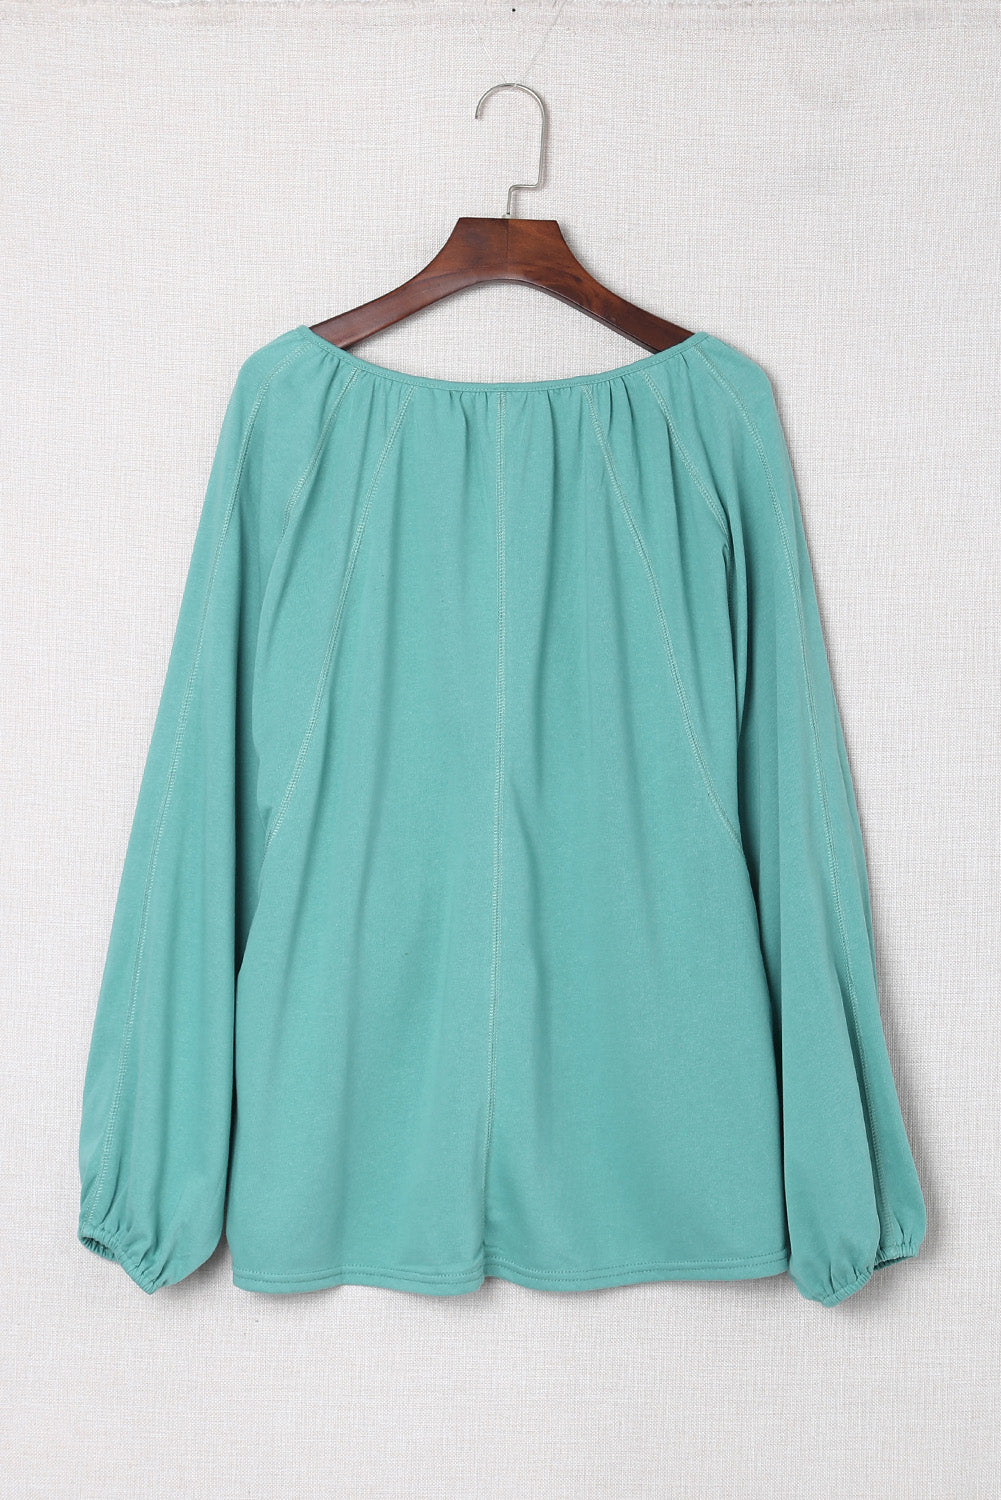 Women's Green Casual Plicated Detail V Neck Blouse